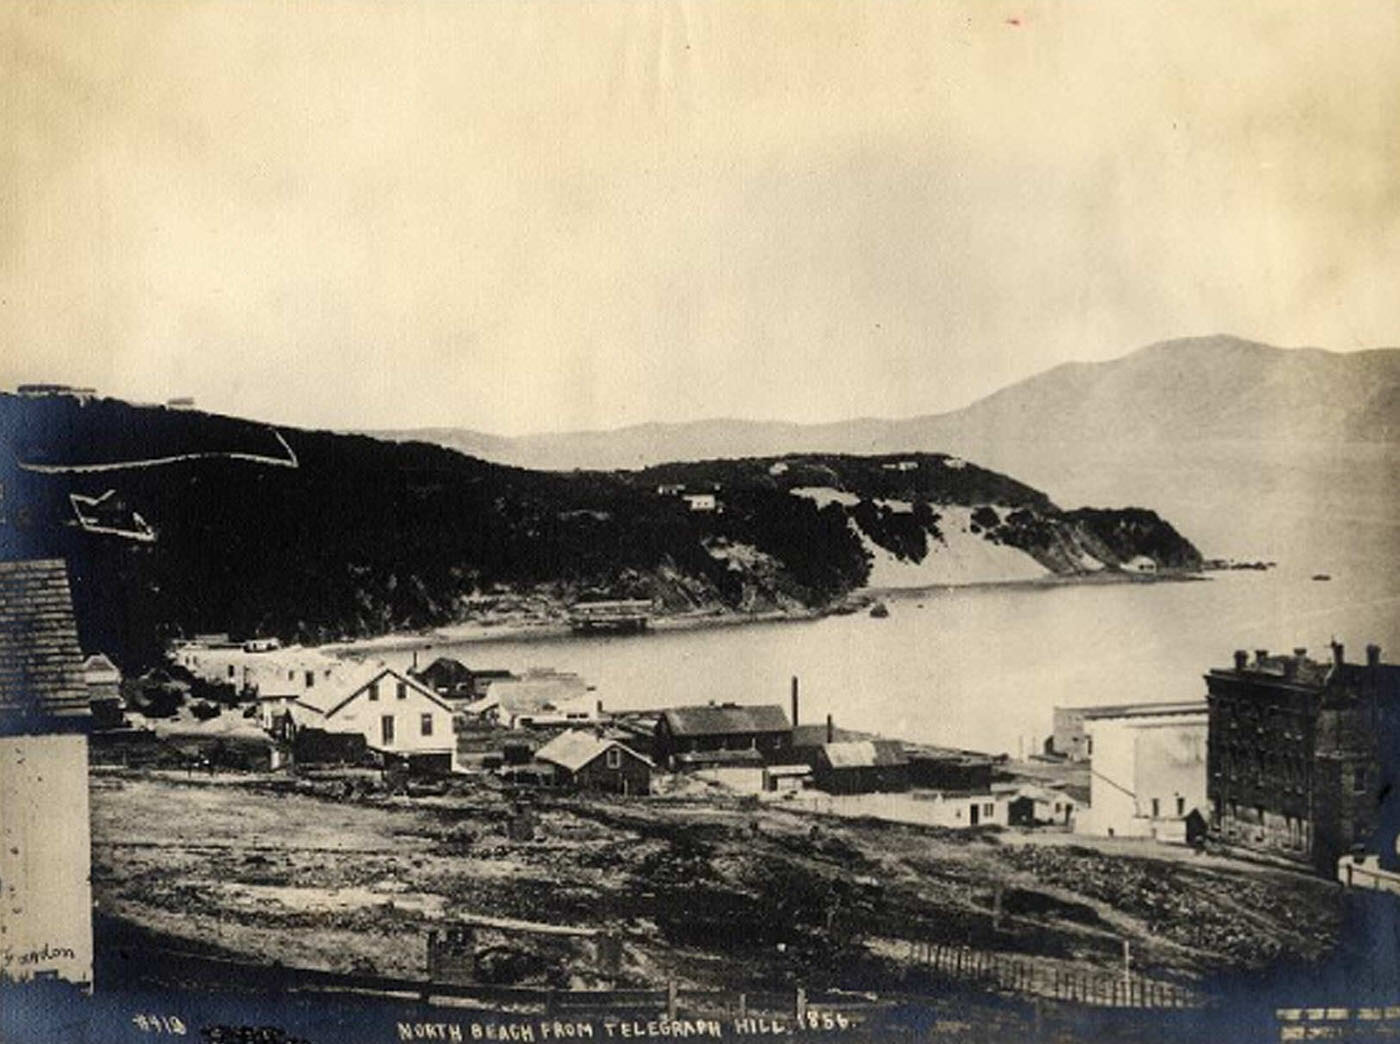 North Beach from Telegraph Hill, 1856